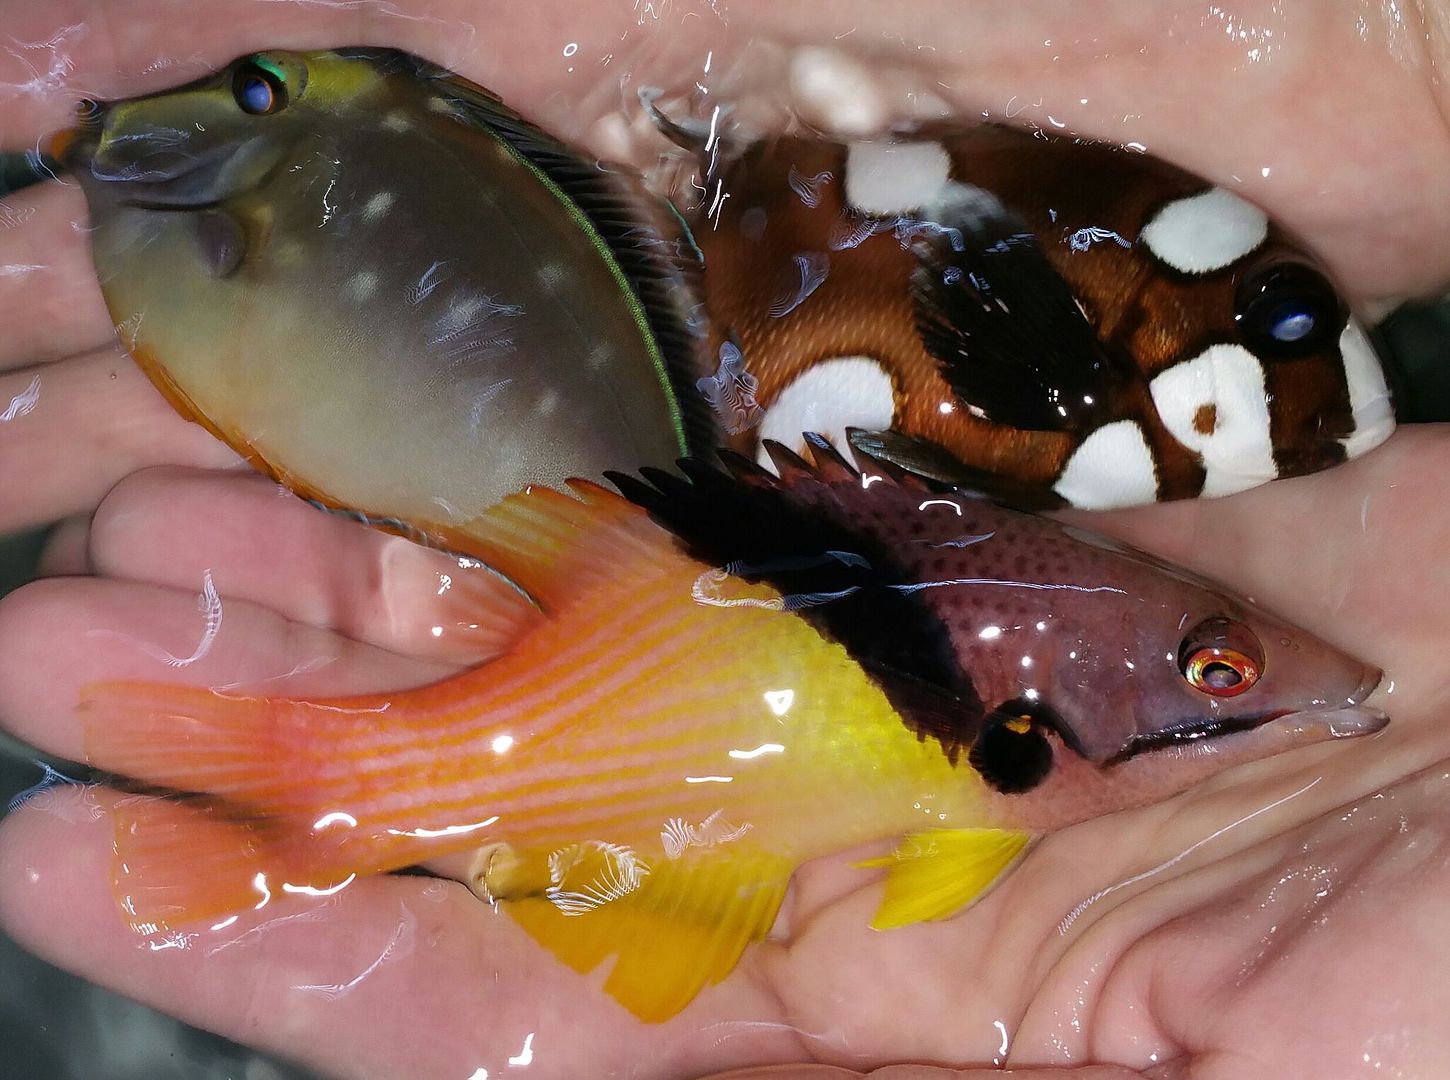 unspecified zps0agj2zyl - Phenomenal Fish! Only At Tropicorium! Pics & Prices!